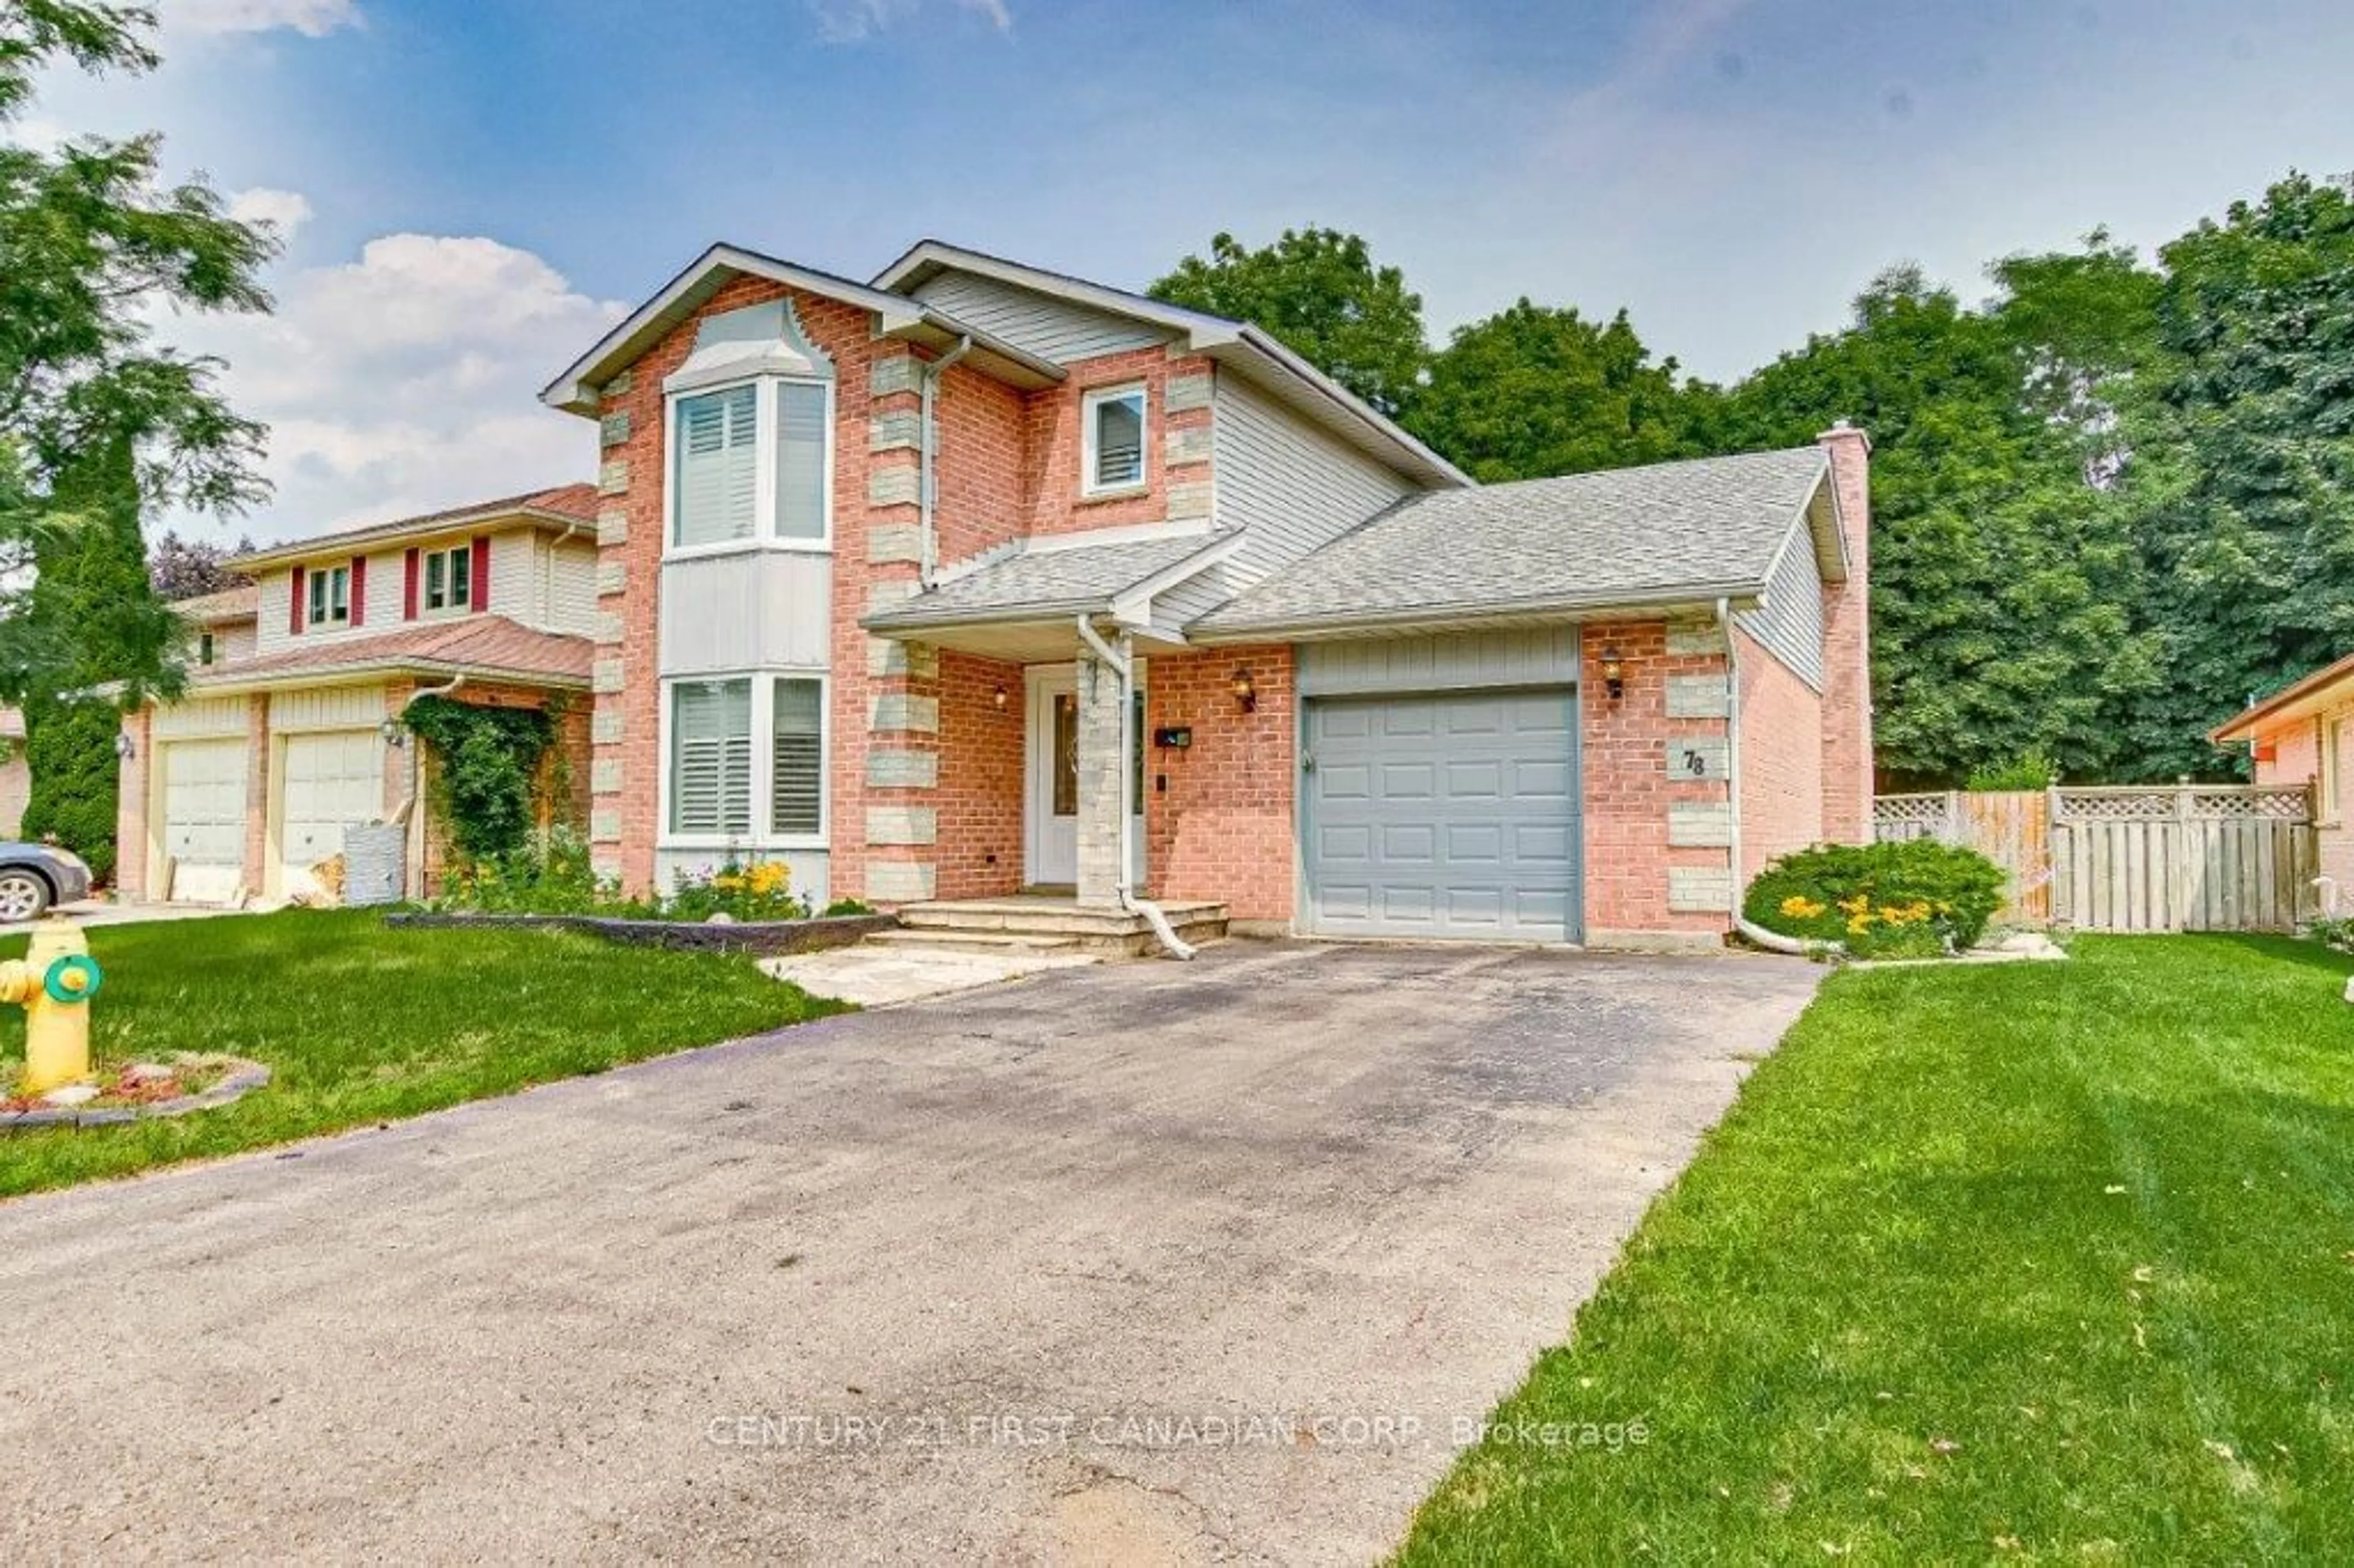 Home with brick exterior material for 78 Benedict Crt, London Ontario N5Y 5H6